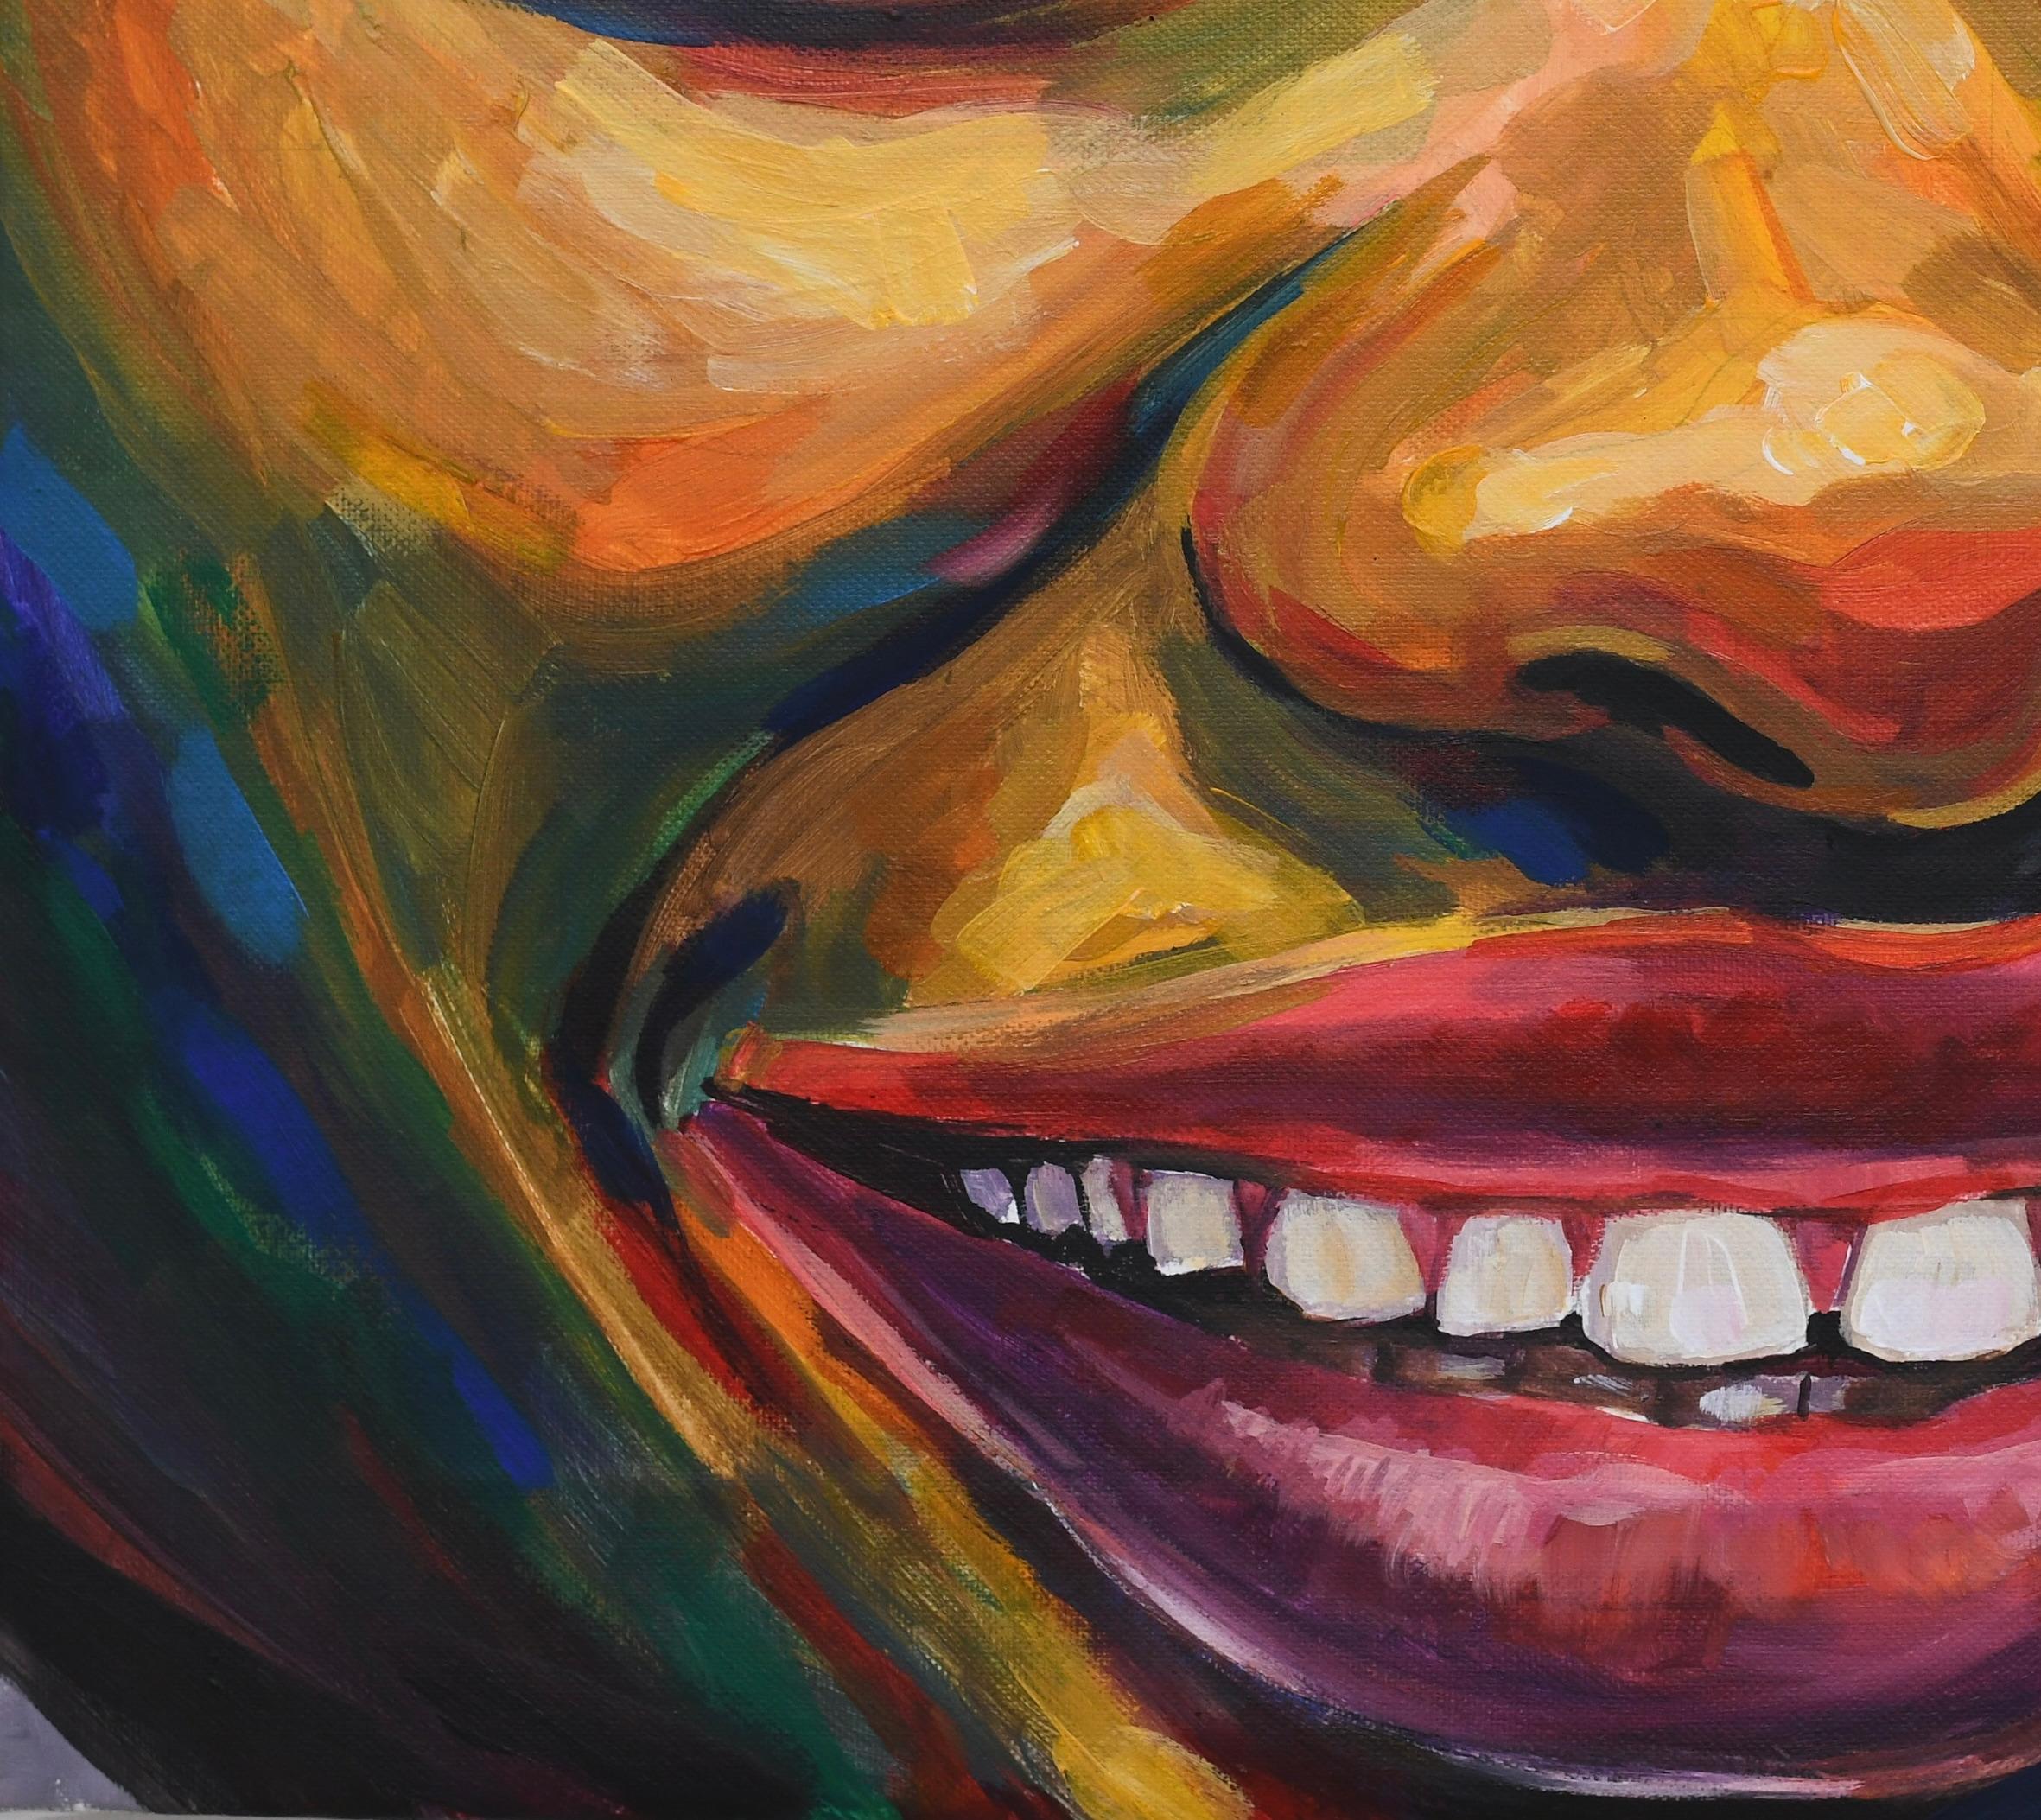 This piece shows a lady demonstrating joy from within with contagious laughter.

We live in a world filled with crazy people, filled with problems and anxieties,
Most times our problems can make us forget that we have that one special gift from the